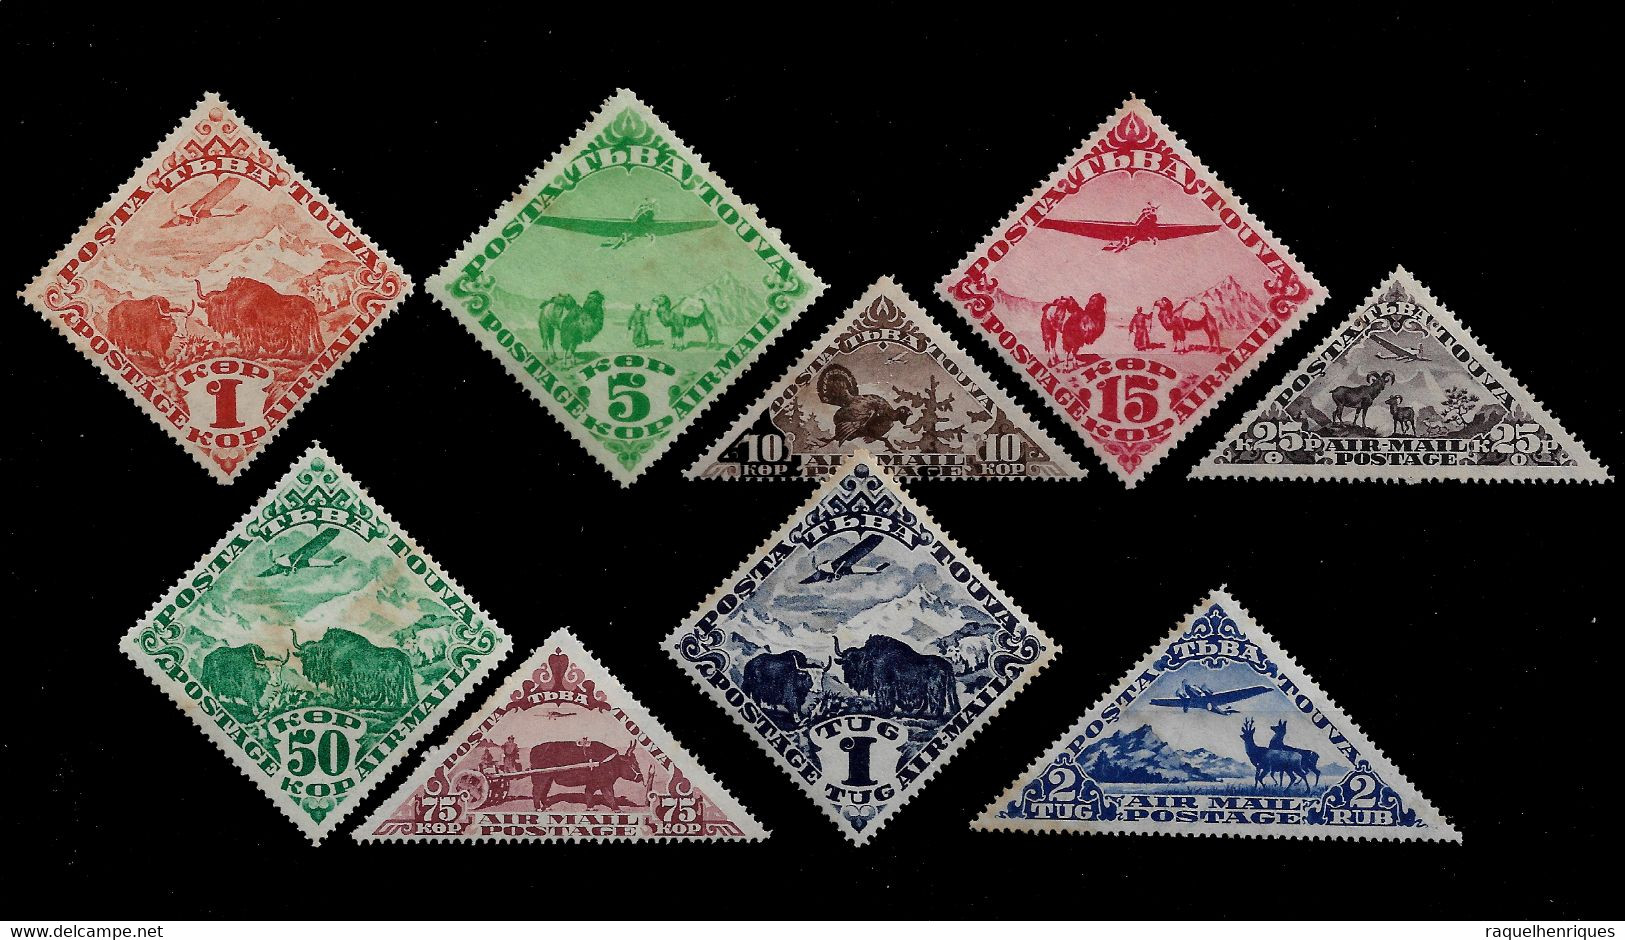 RUSSIA TANNU TOUVA STAMP - 1934 Airmail - Airplanes And Animals SET MH (BA5#301) - Touva